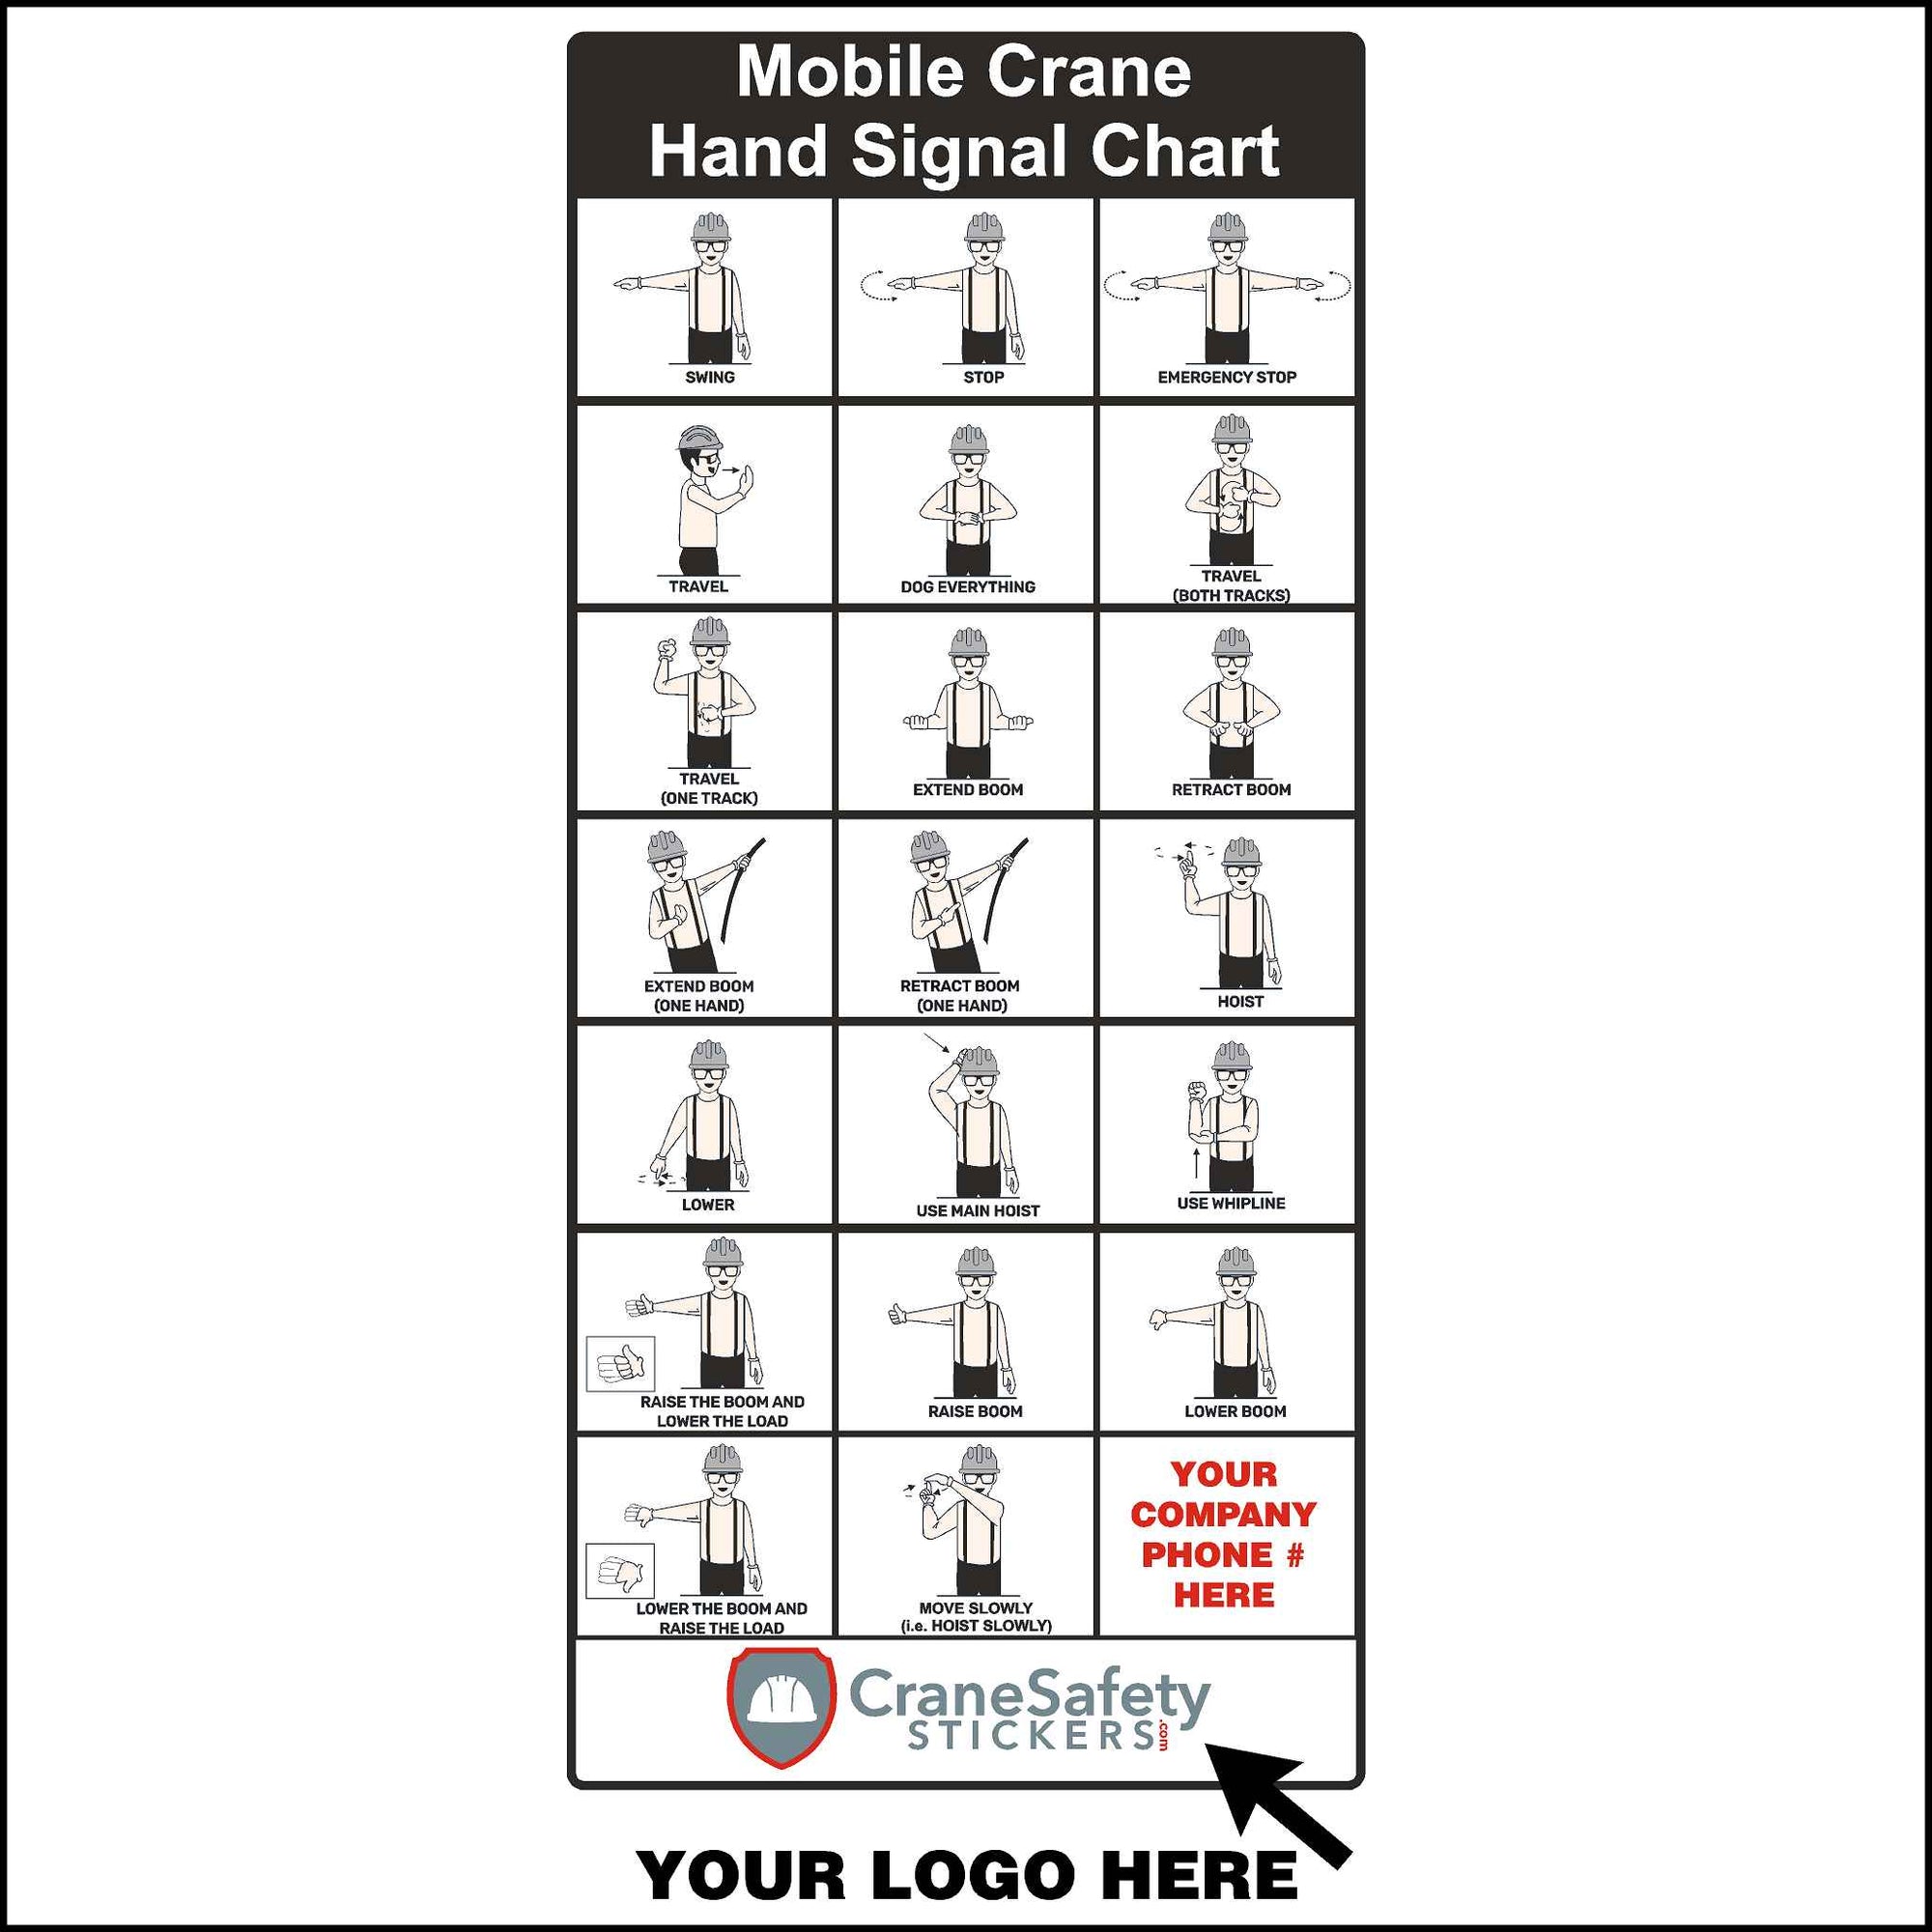 Custom Hand Signal Chart For Cranes. The Hand Signal Chart Is Printed With all the Hand Signals and you can add your company logo or name, address and phone number.